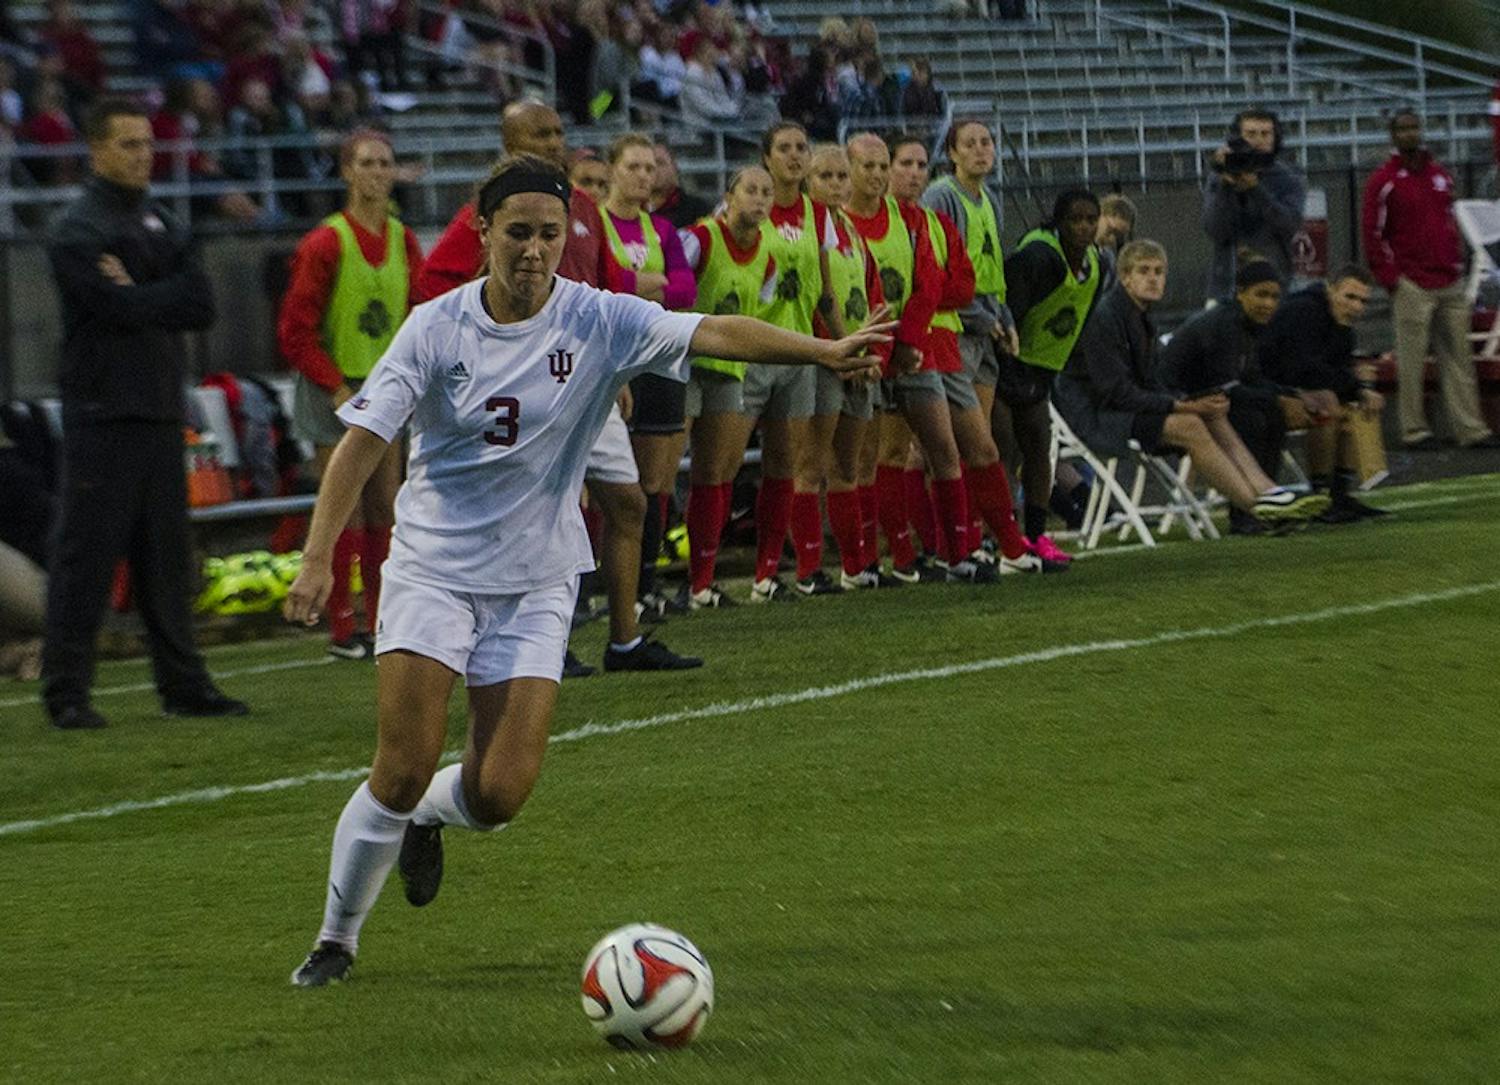 Midfielder Tori Keller takes an indirect freekick and assists IU's leading scorer midfielder Jessie Bujoueves in scoring IU's only goal against Ohio State on September 12. Ohio State tied the game in the 90th minute and eventually won in overtime 2-1.